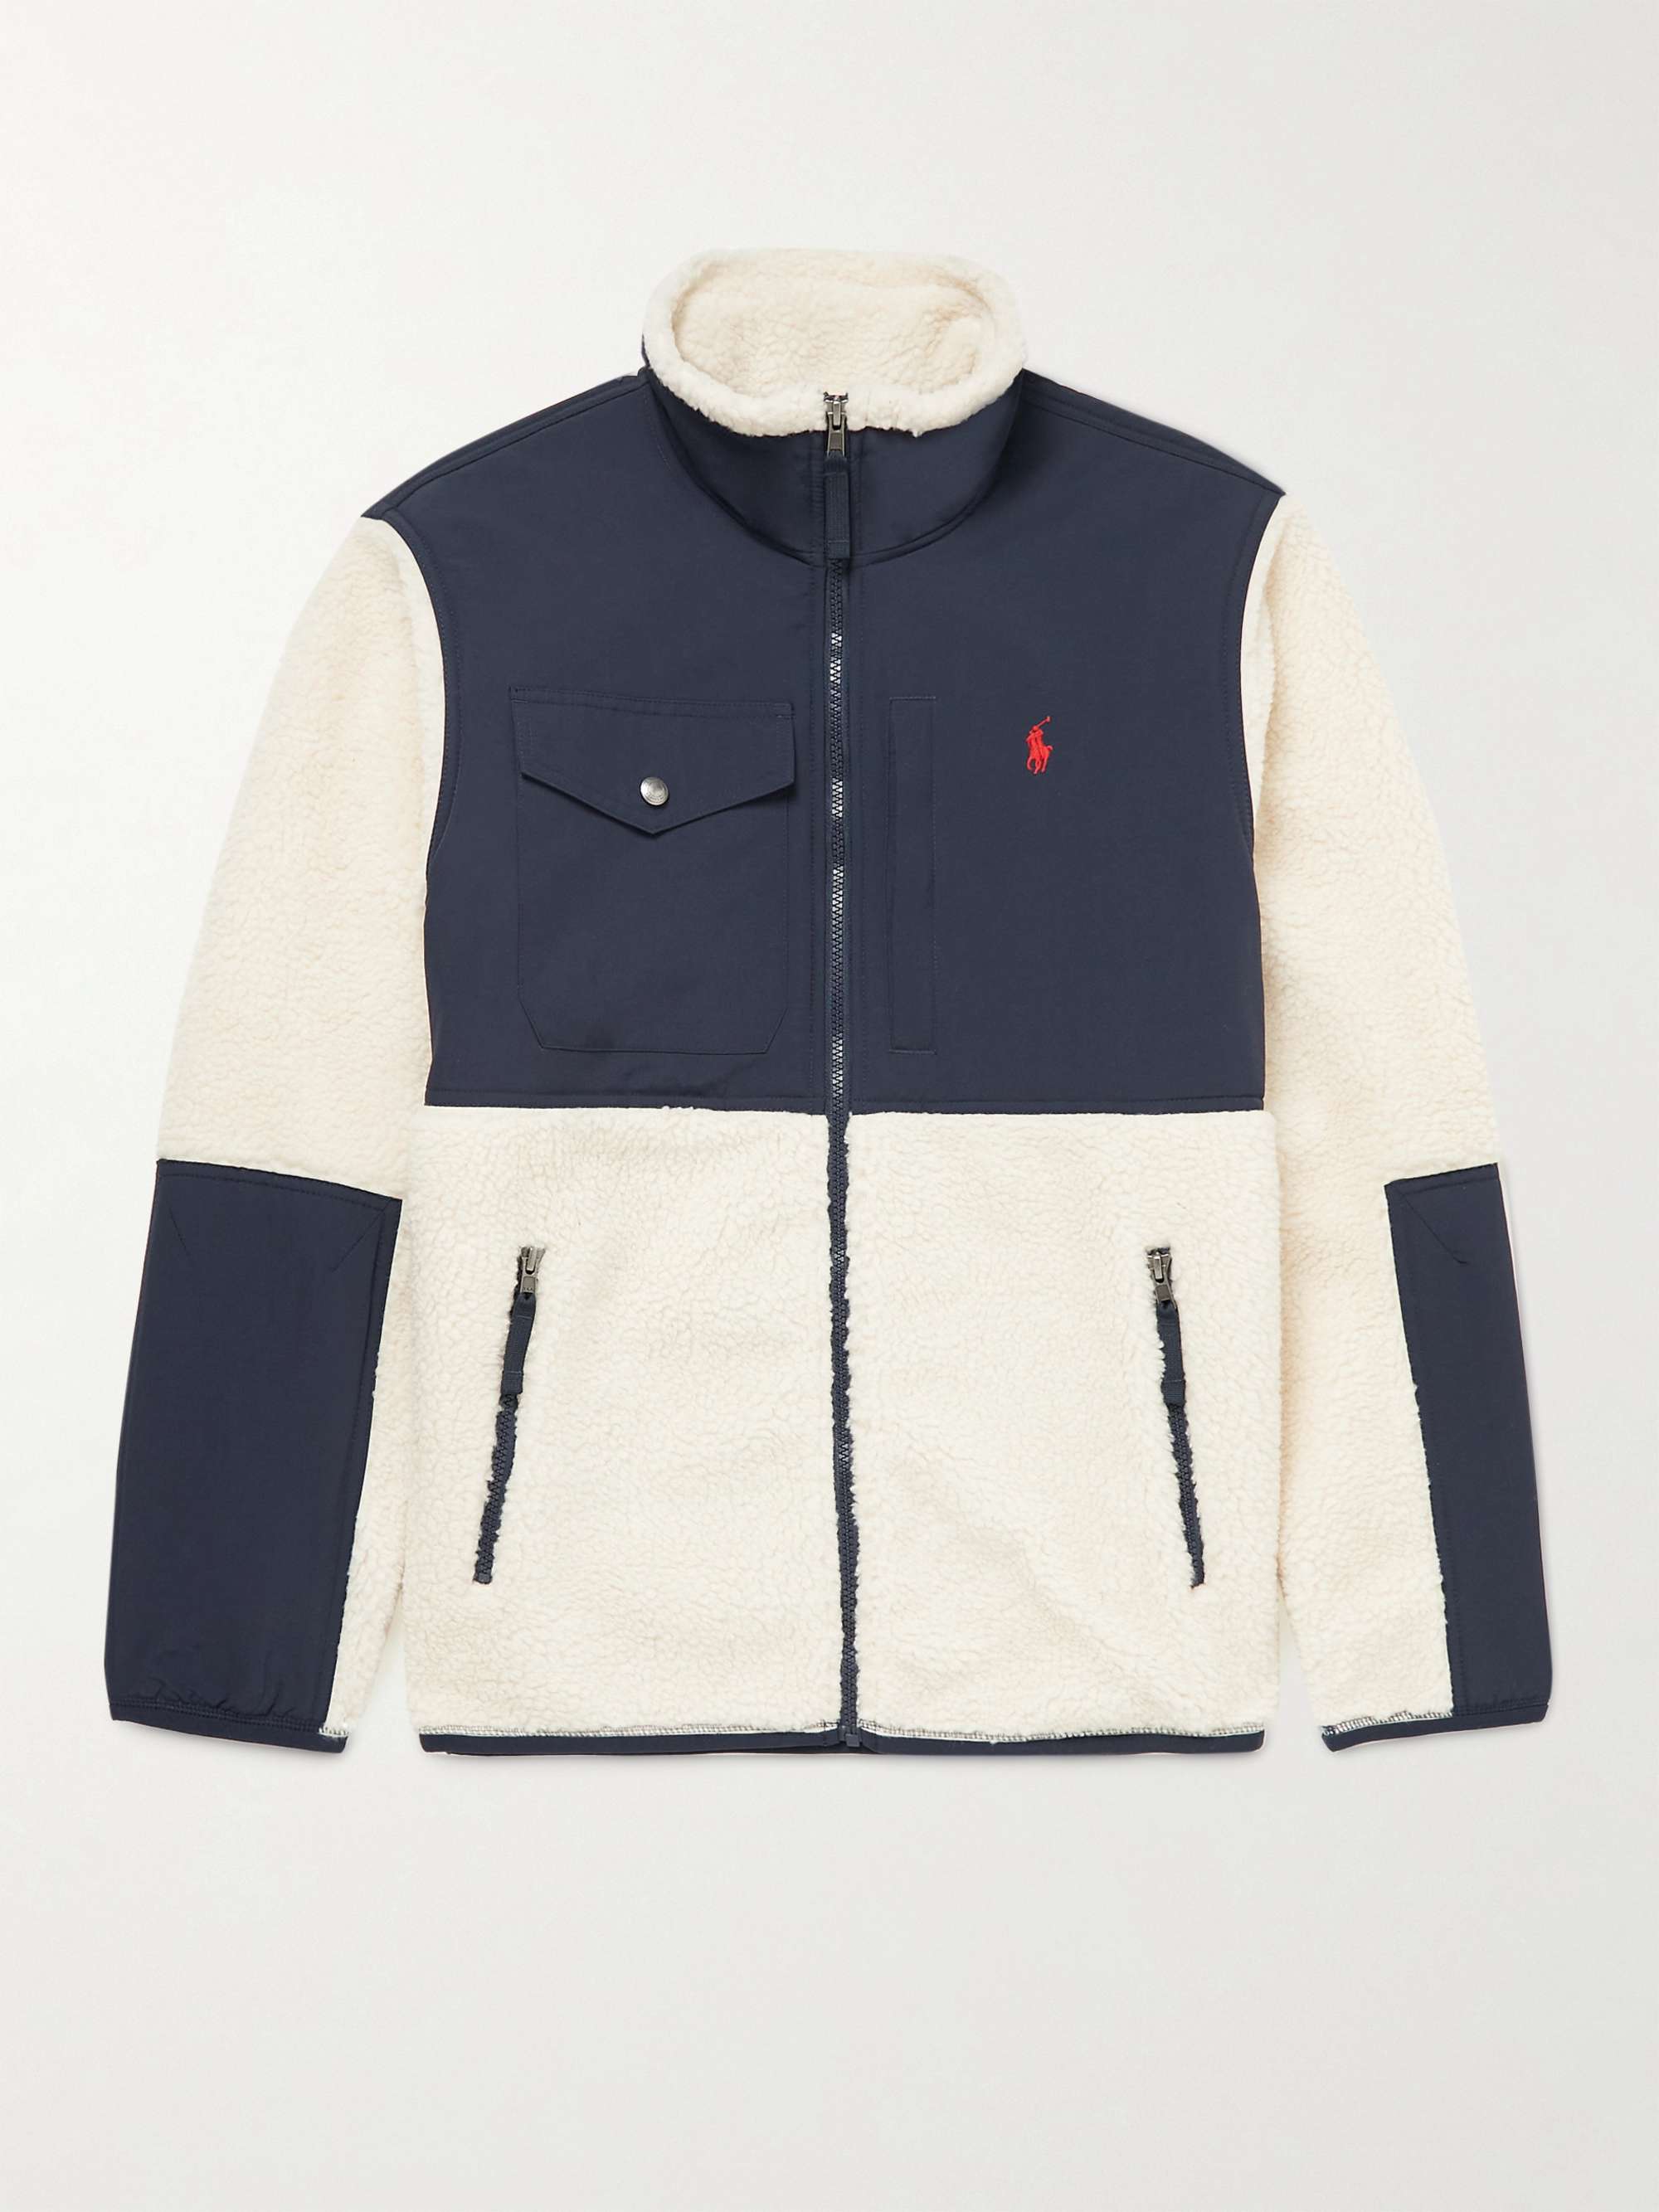 POLO RALPH LAUREN Panelled Faux Shearling and Shell Jacket